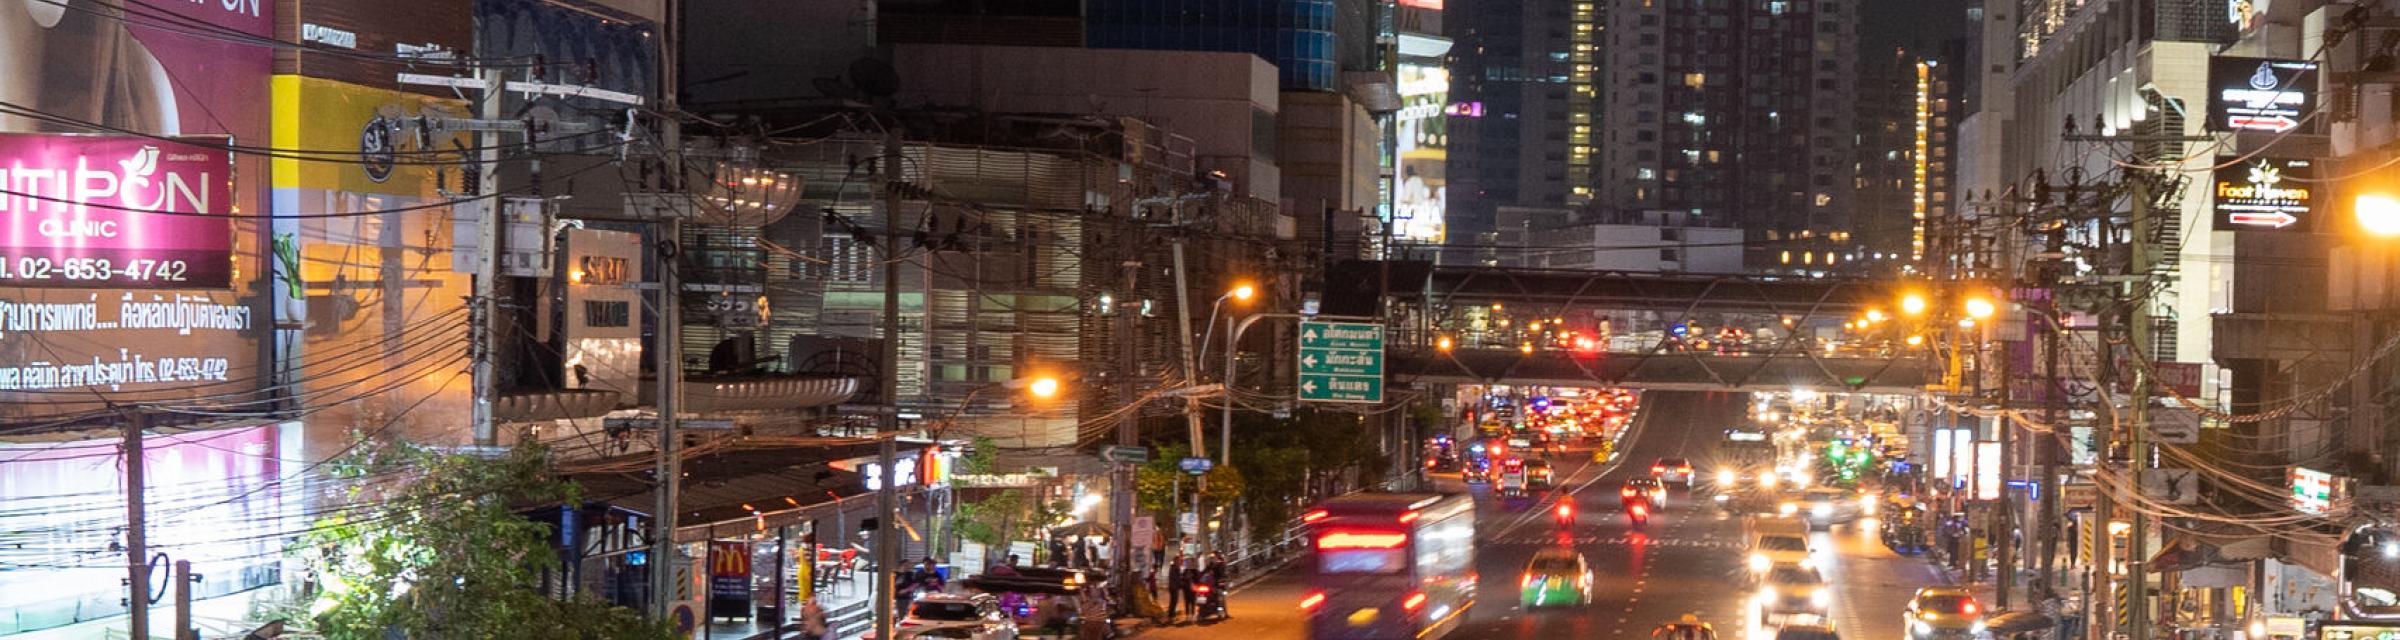 A busy street in Bangkok, Thailand, at night. Photo by RJ Rempel.